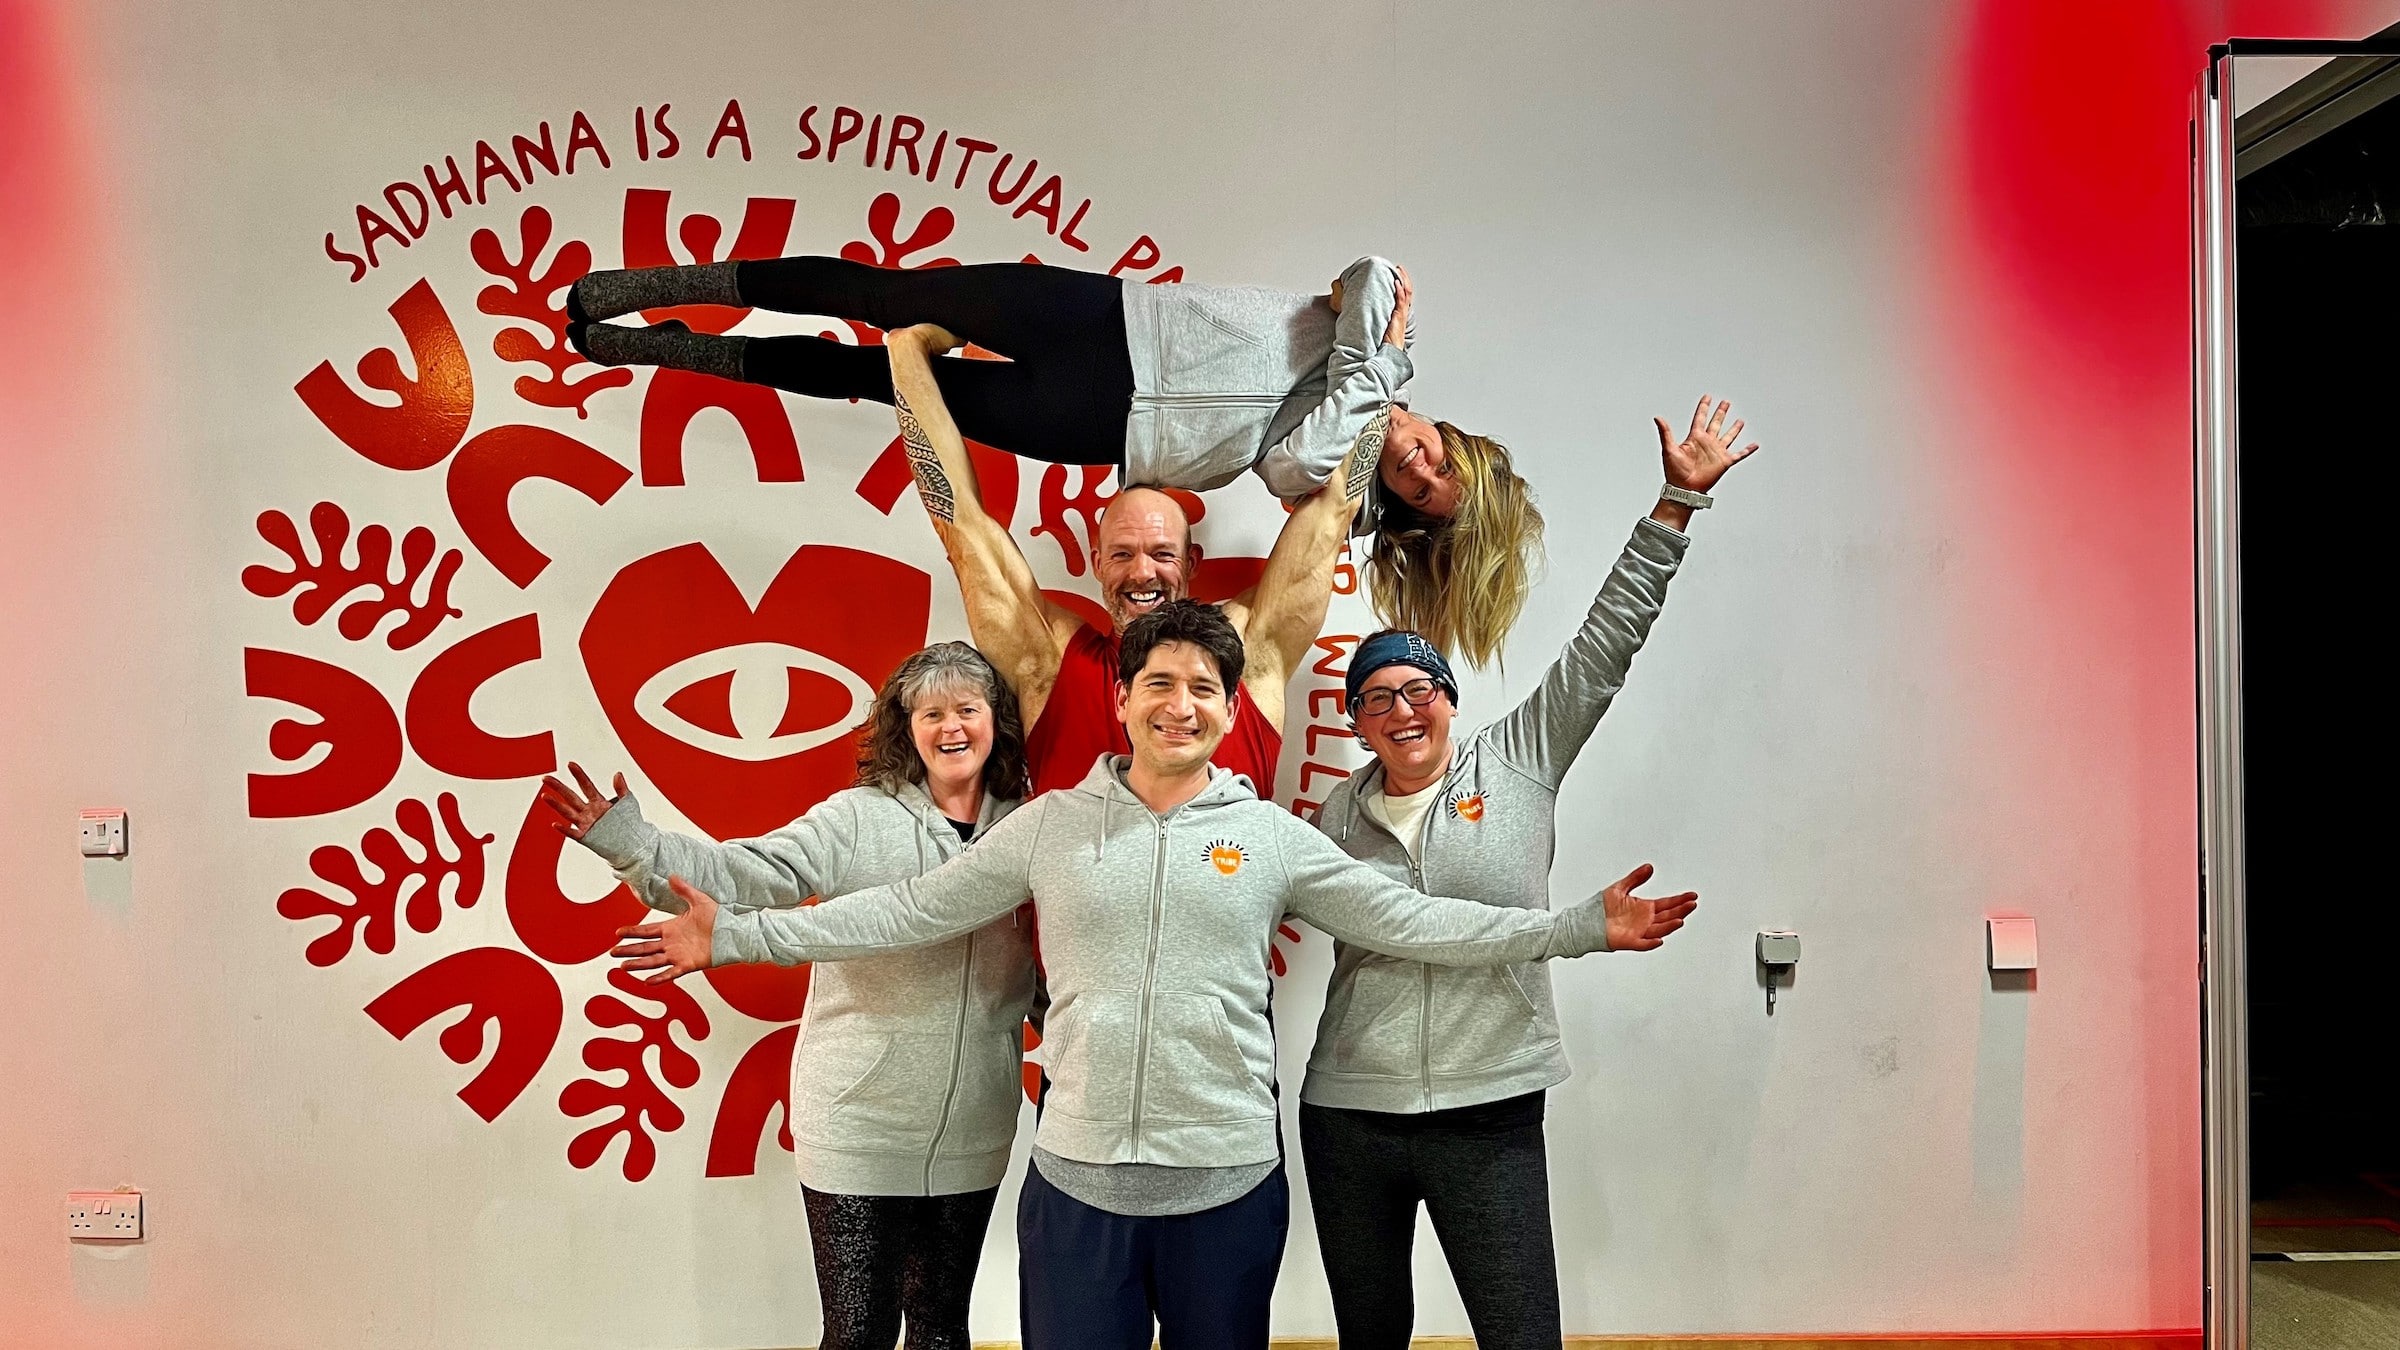 Sadhana Live Brings Together Yoga, WellBeing, And A Thriving Community On One Platform